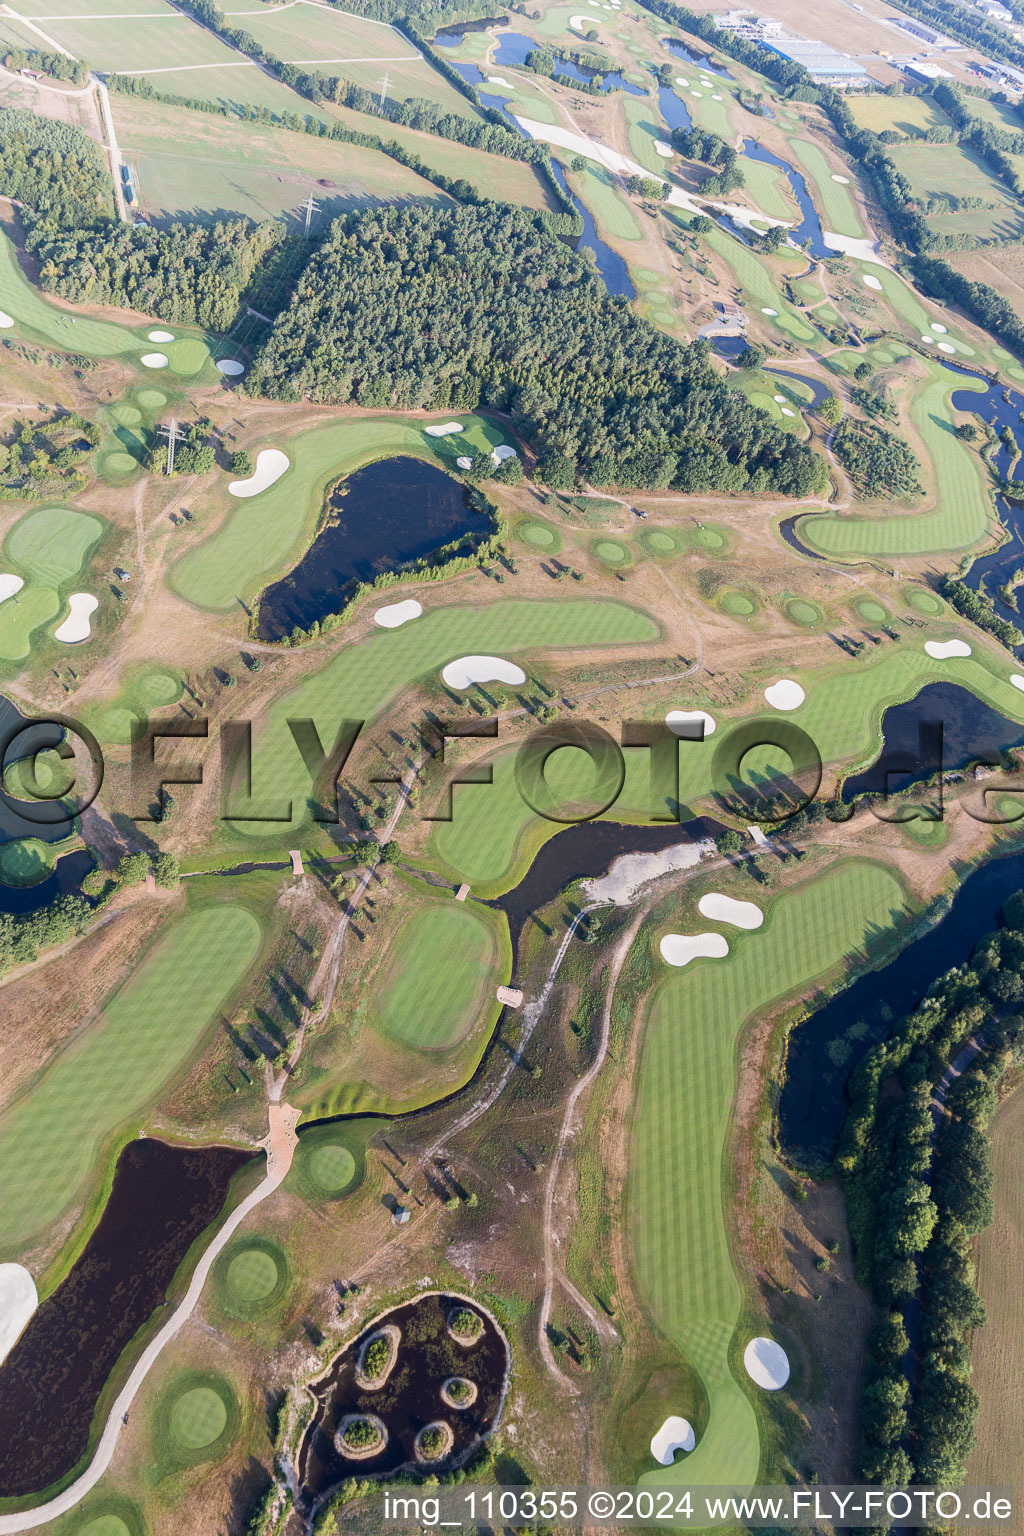 Grounds of the Golf course at Green Eagle Golf Courses in Winsen (Luhe) in the state Lower Saxony, Germany viewn from the air